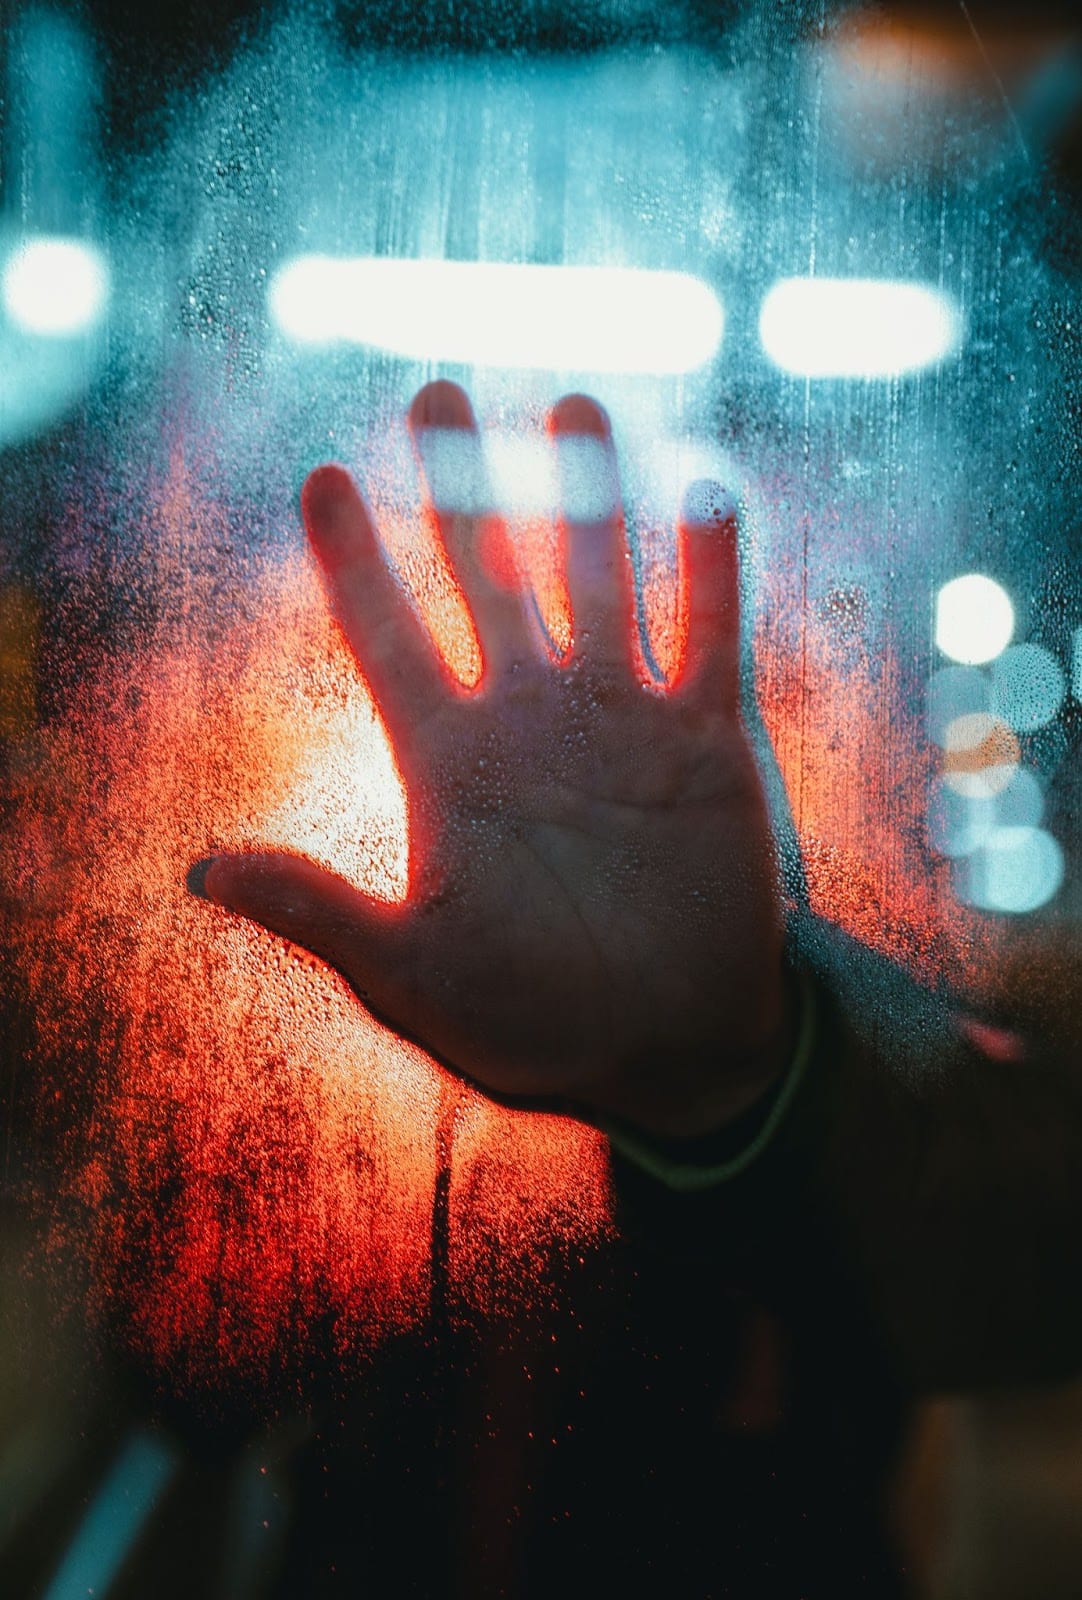 Picture of a hand on a window with red and blue background shining through